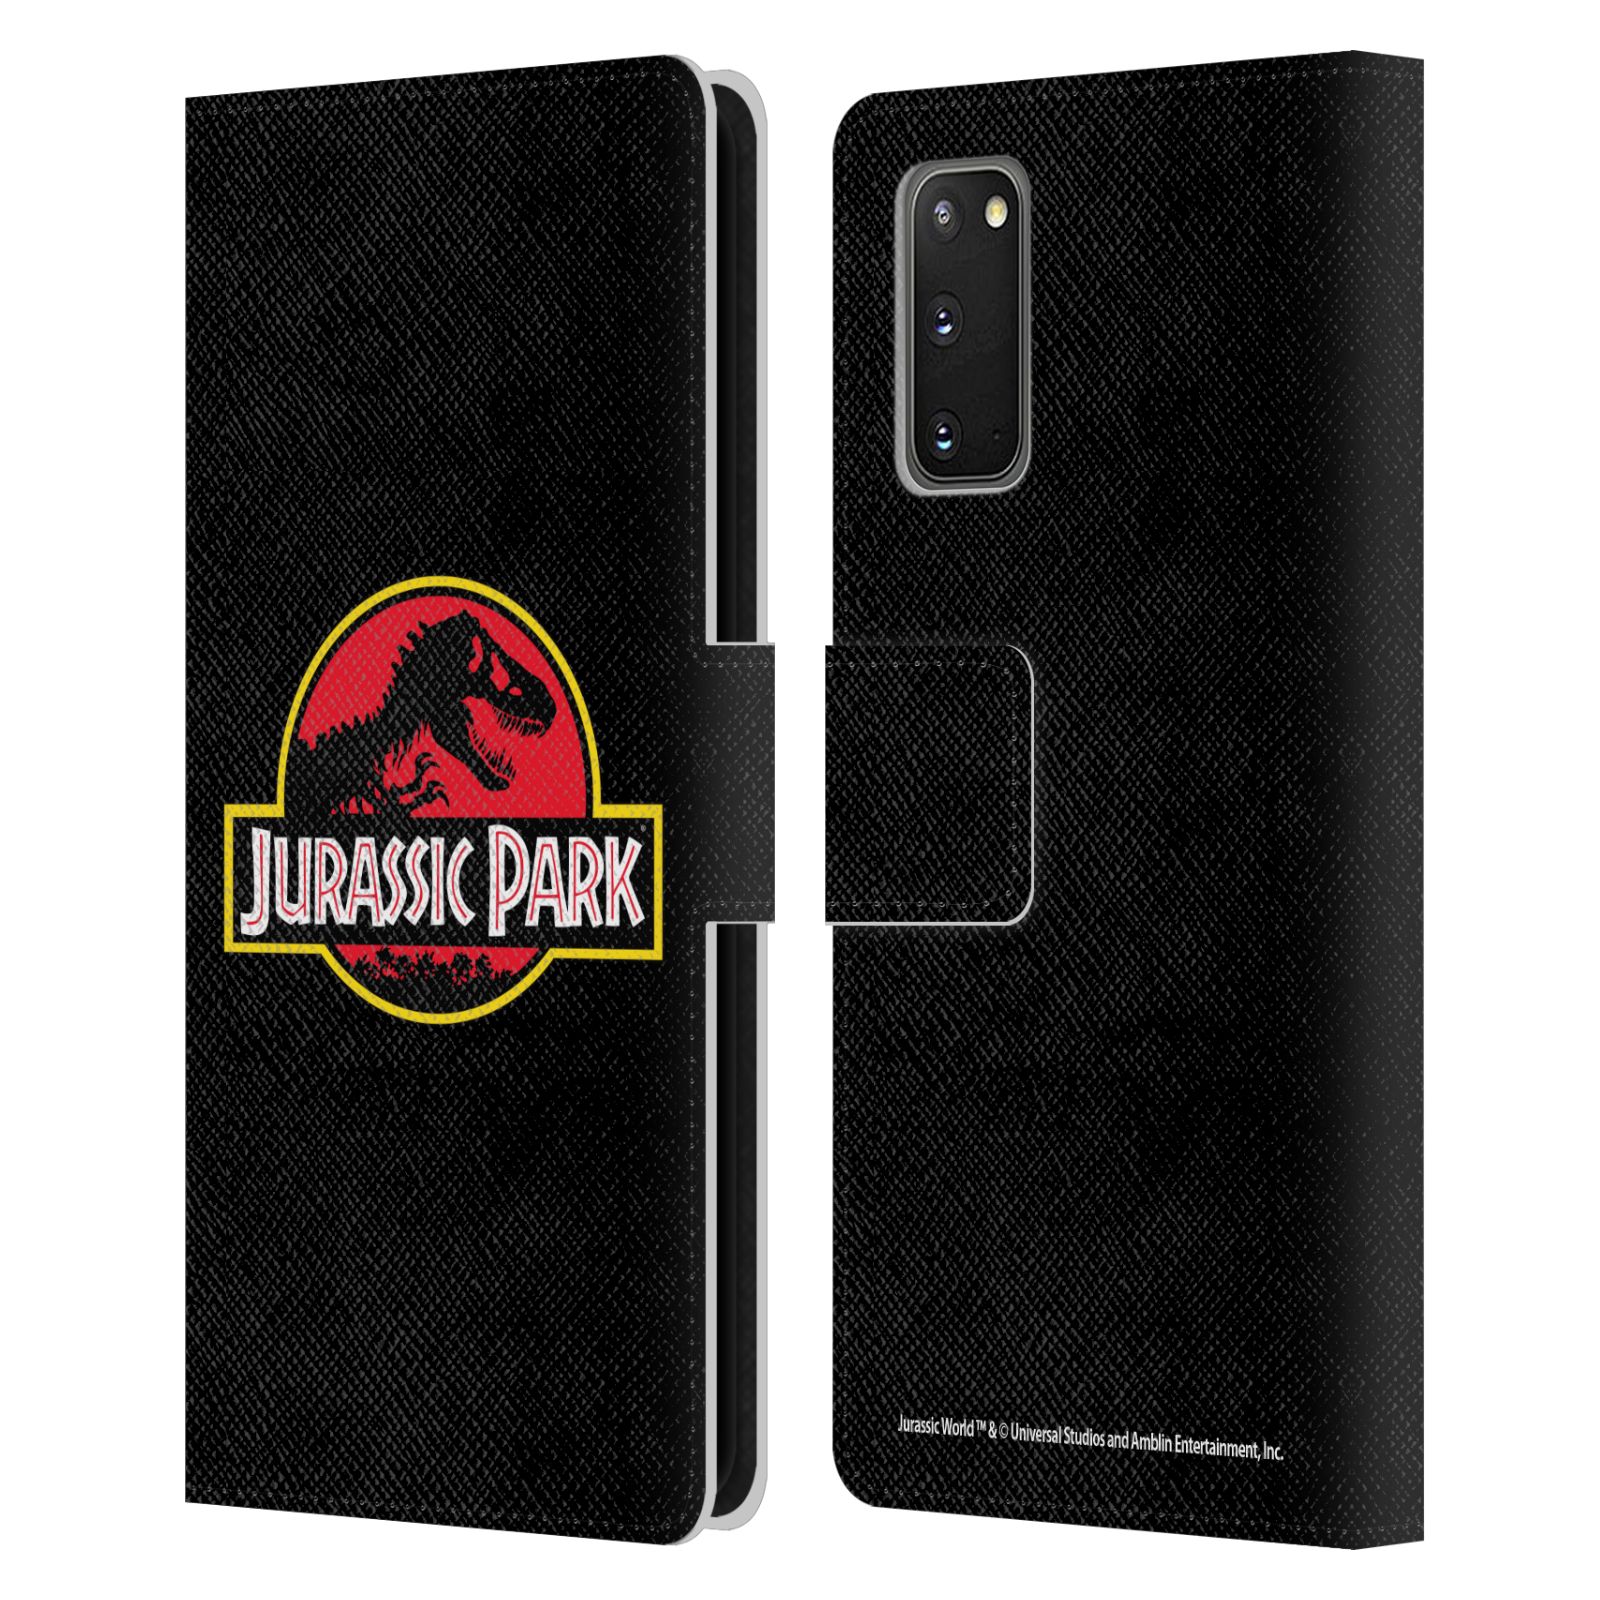 thumbnail 7 - OFFICIAL JURASSIC PARK LOGO LEATHER BOOK WALLET CASE COVER FOR SAMSUNG PHONES 1